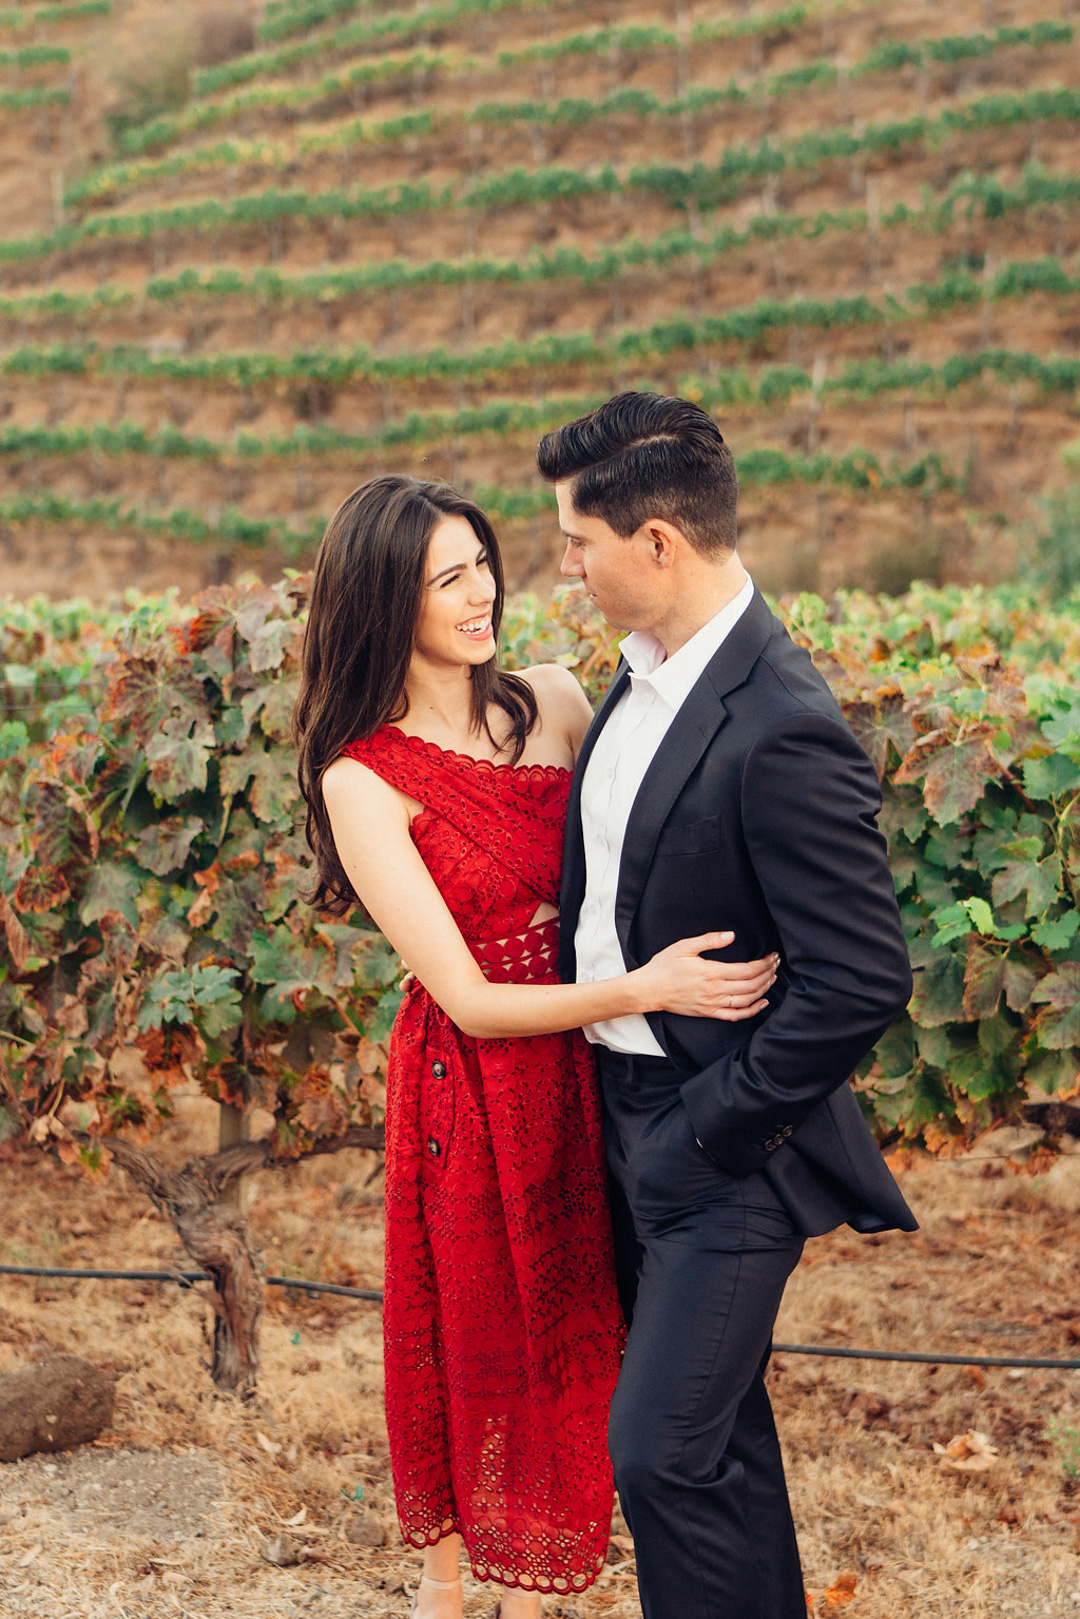 Jackie and Luke take engagement pictures at a vineyard in Malibu. 